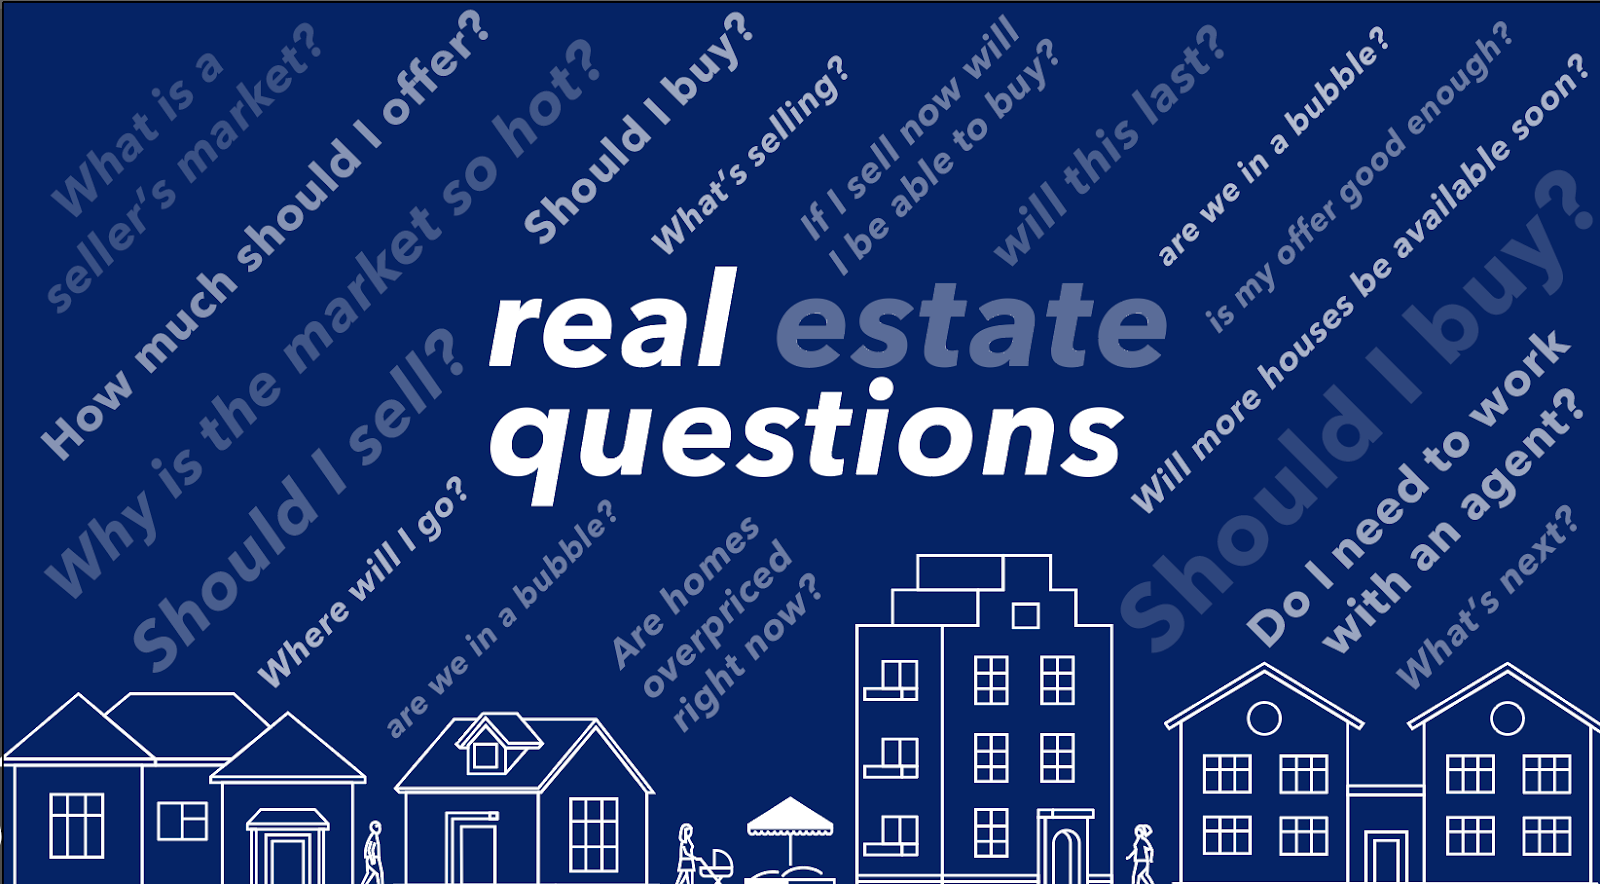 5 FAQs About Upstate Real Estate